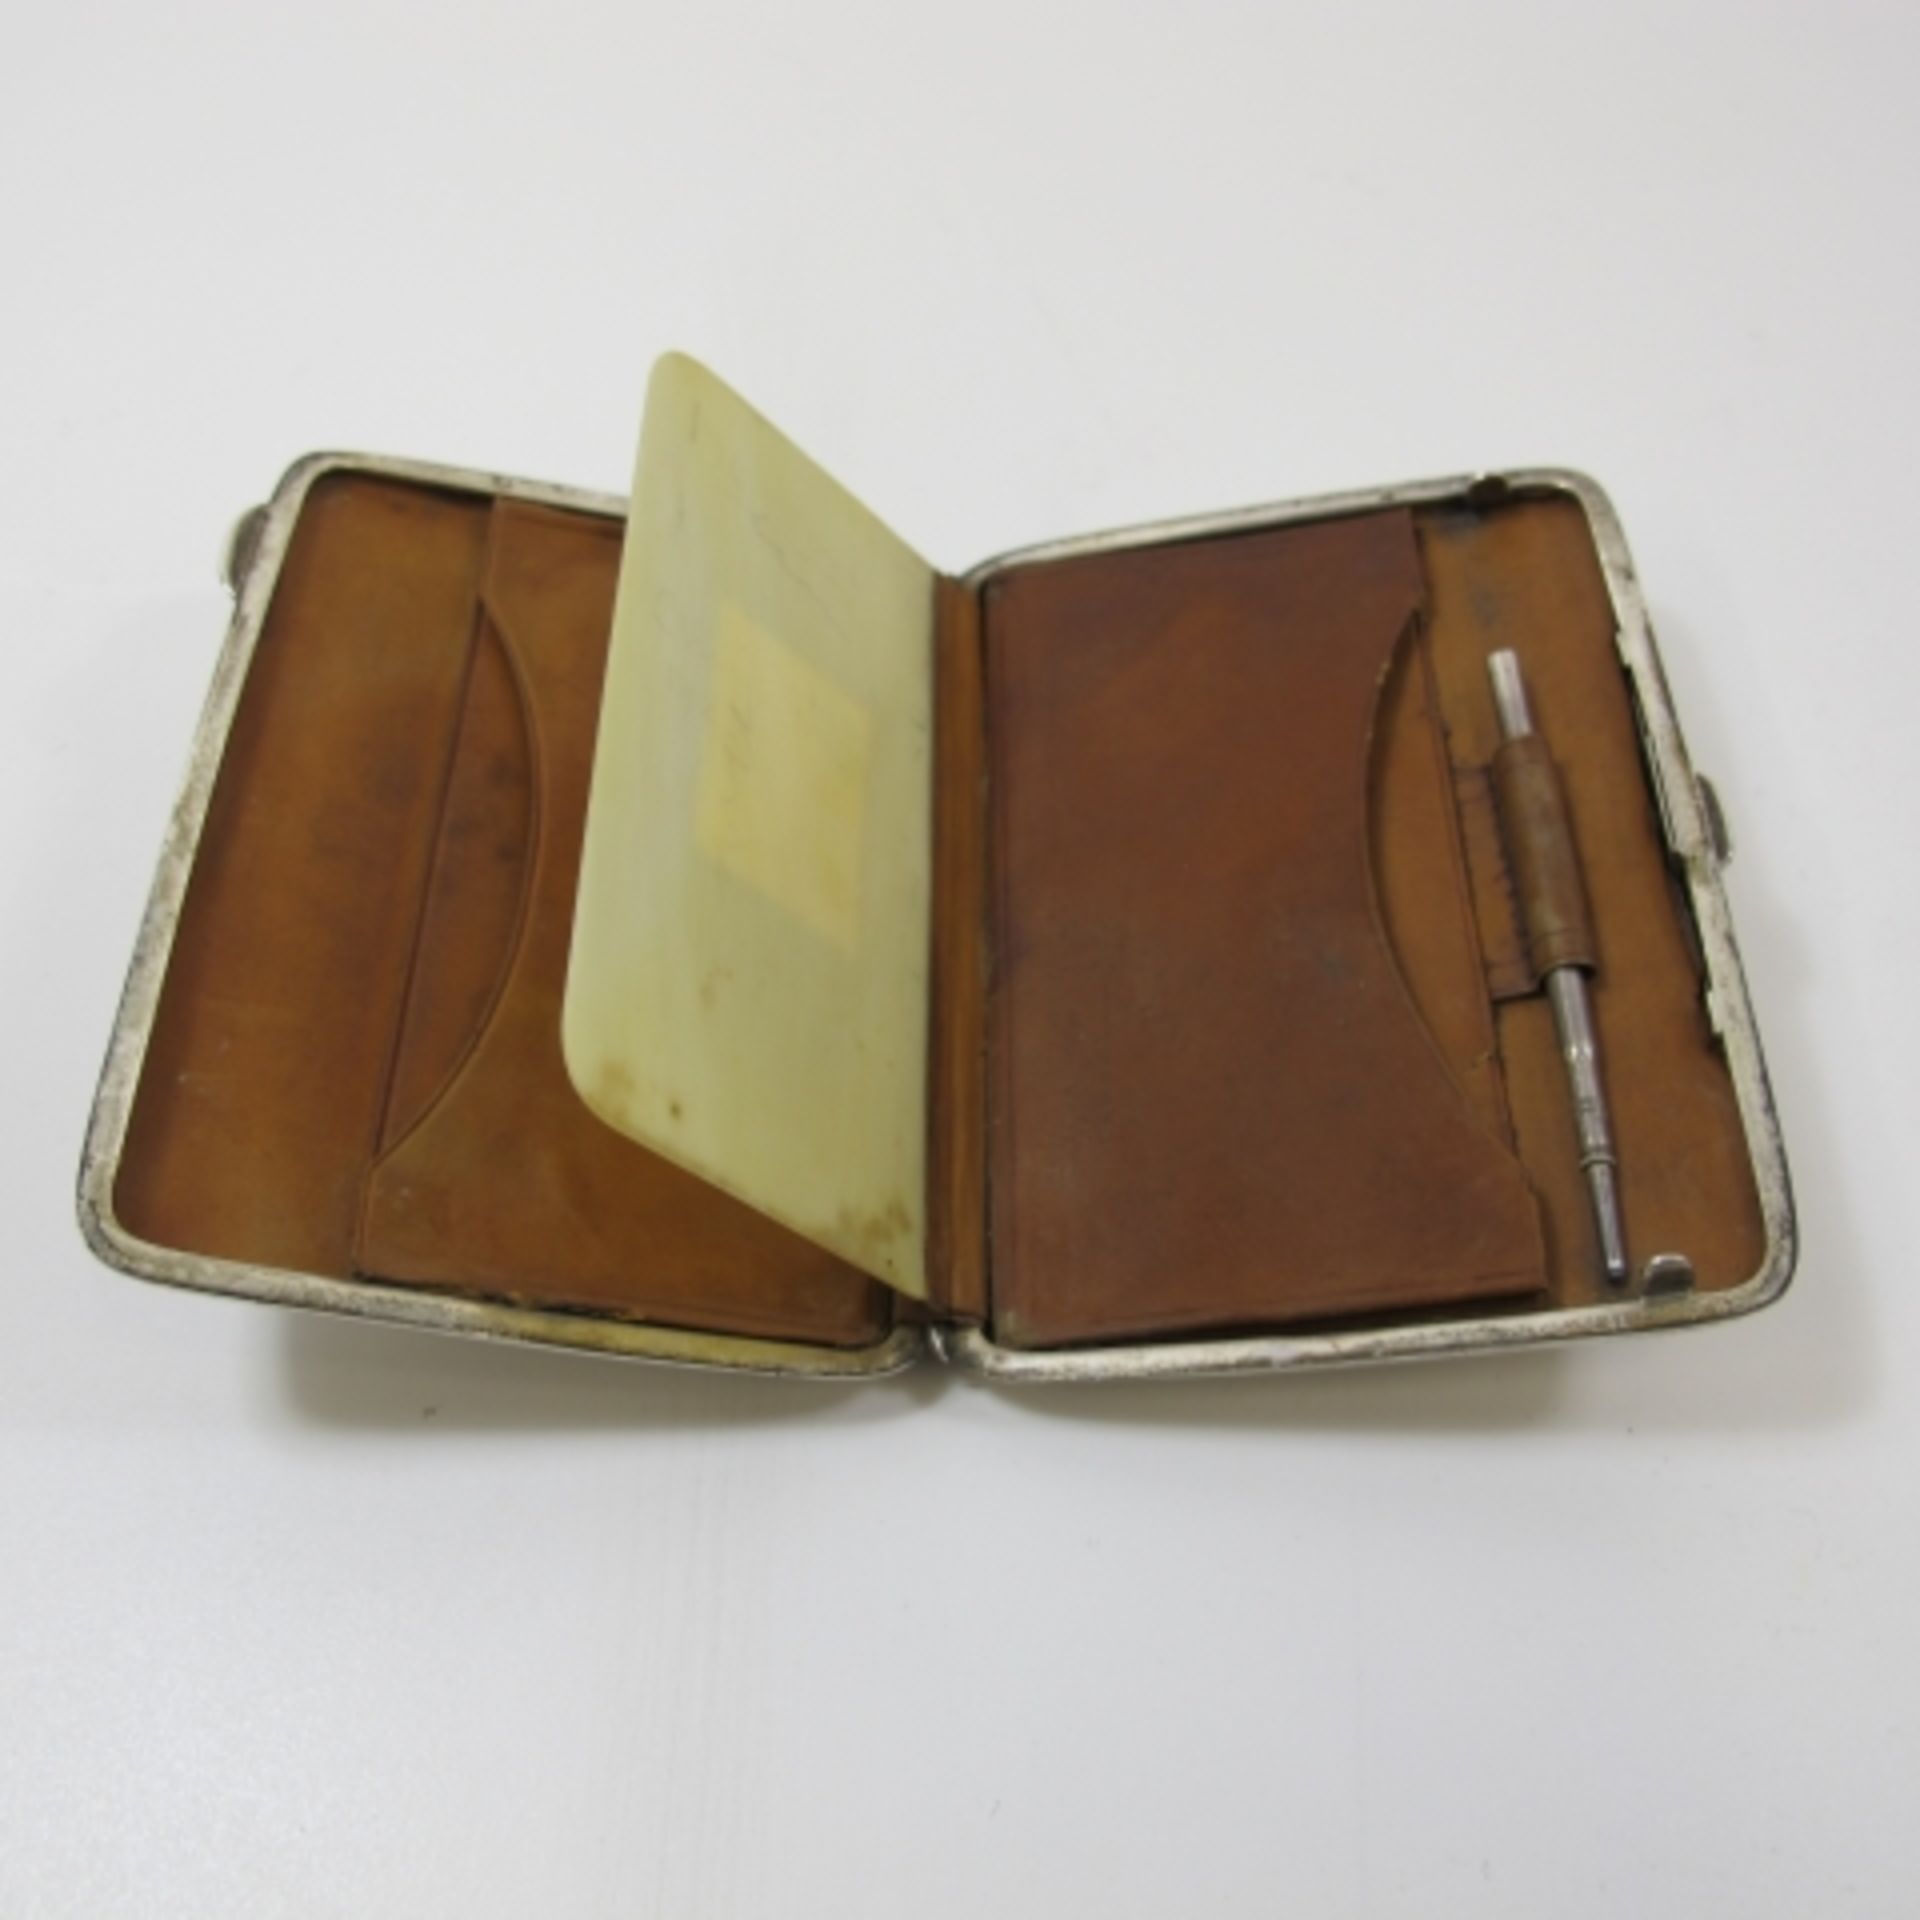 A Silver (Sheffield 1903) Gentleman's Business Card Holder With Enclosed Sterling Silver Pencil. - Image 2 of 3